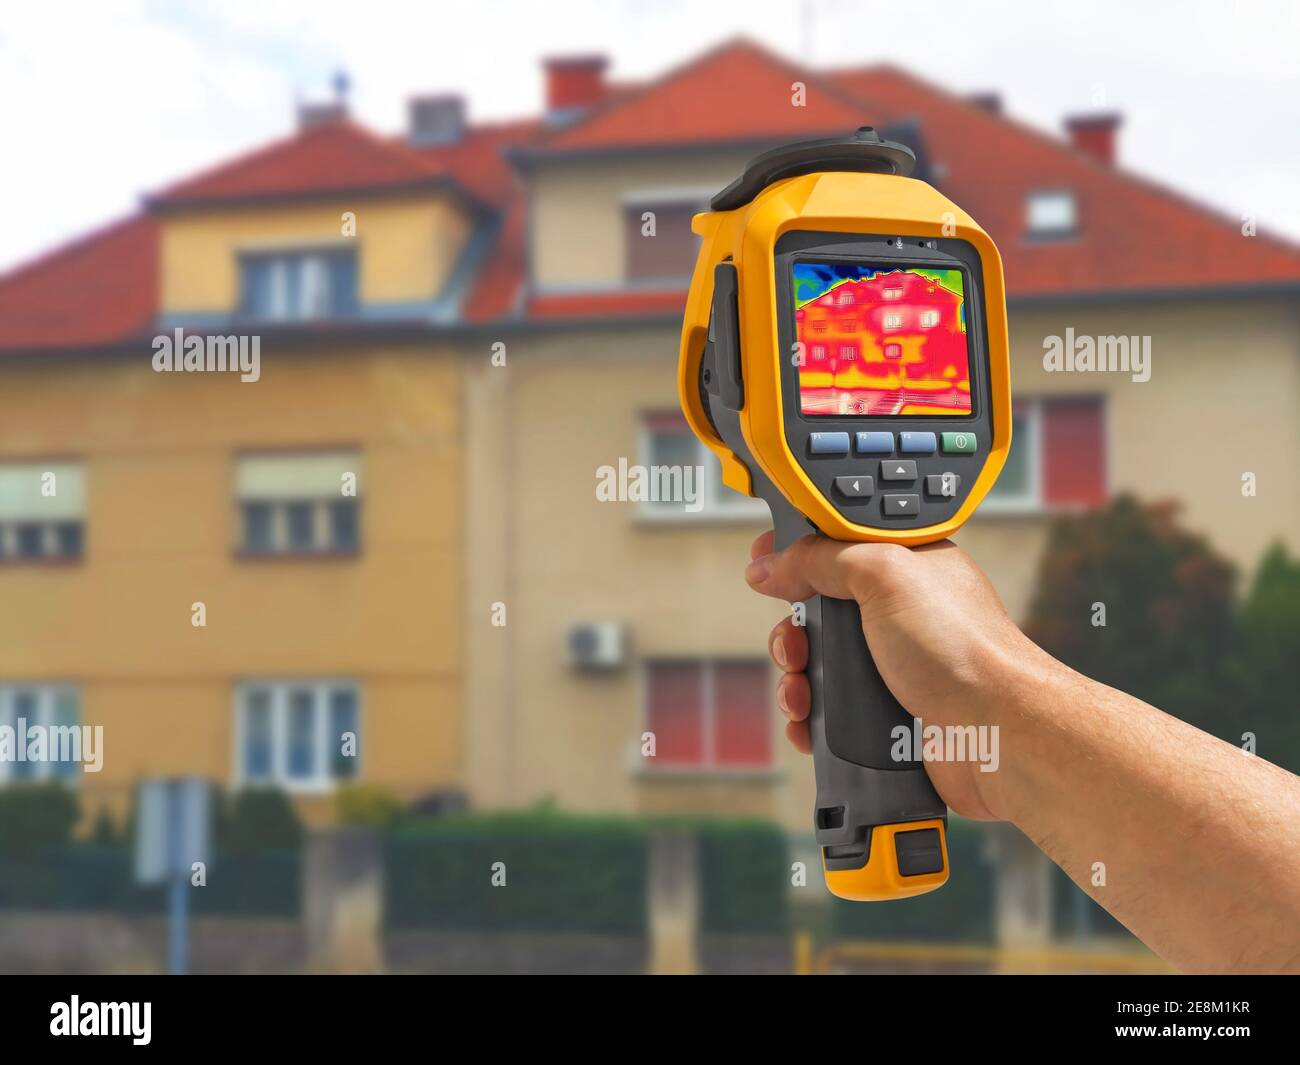 Recording Heat Loss at the House With Infrared Thermal Camera Stock Photo -  Alamy